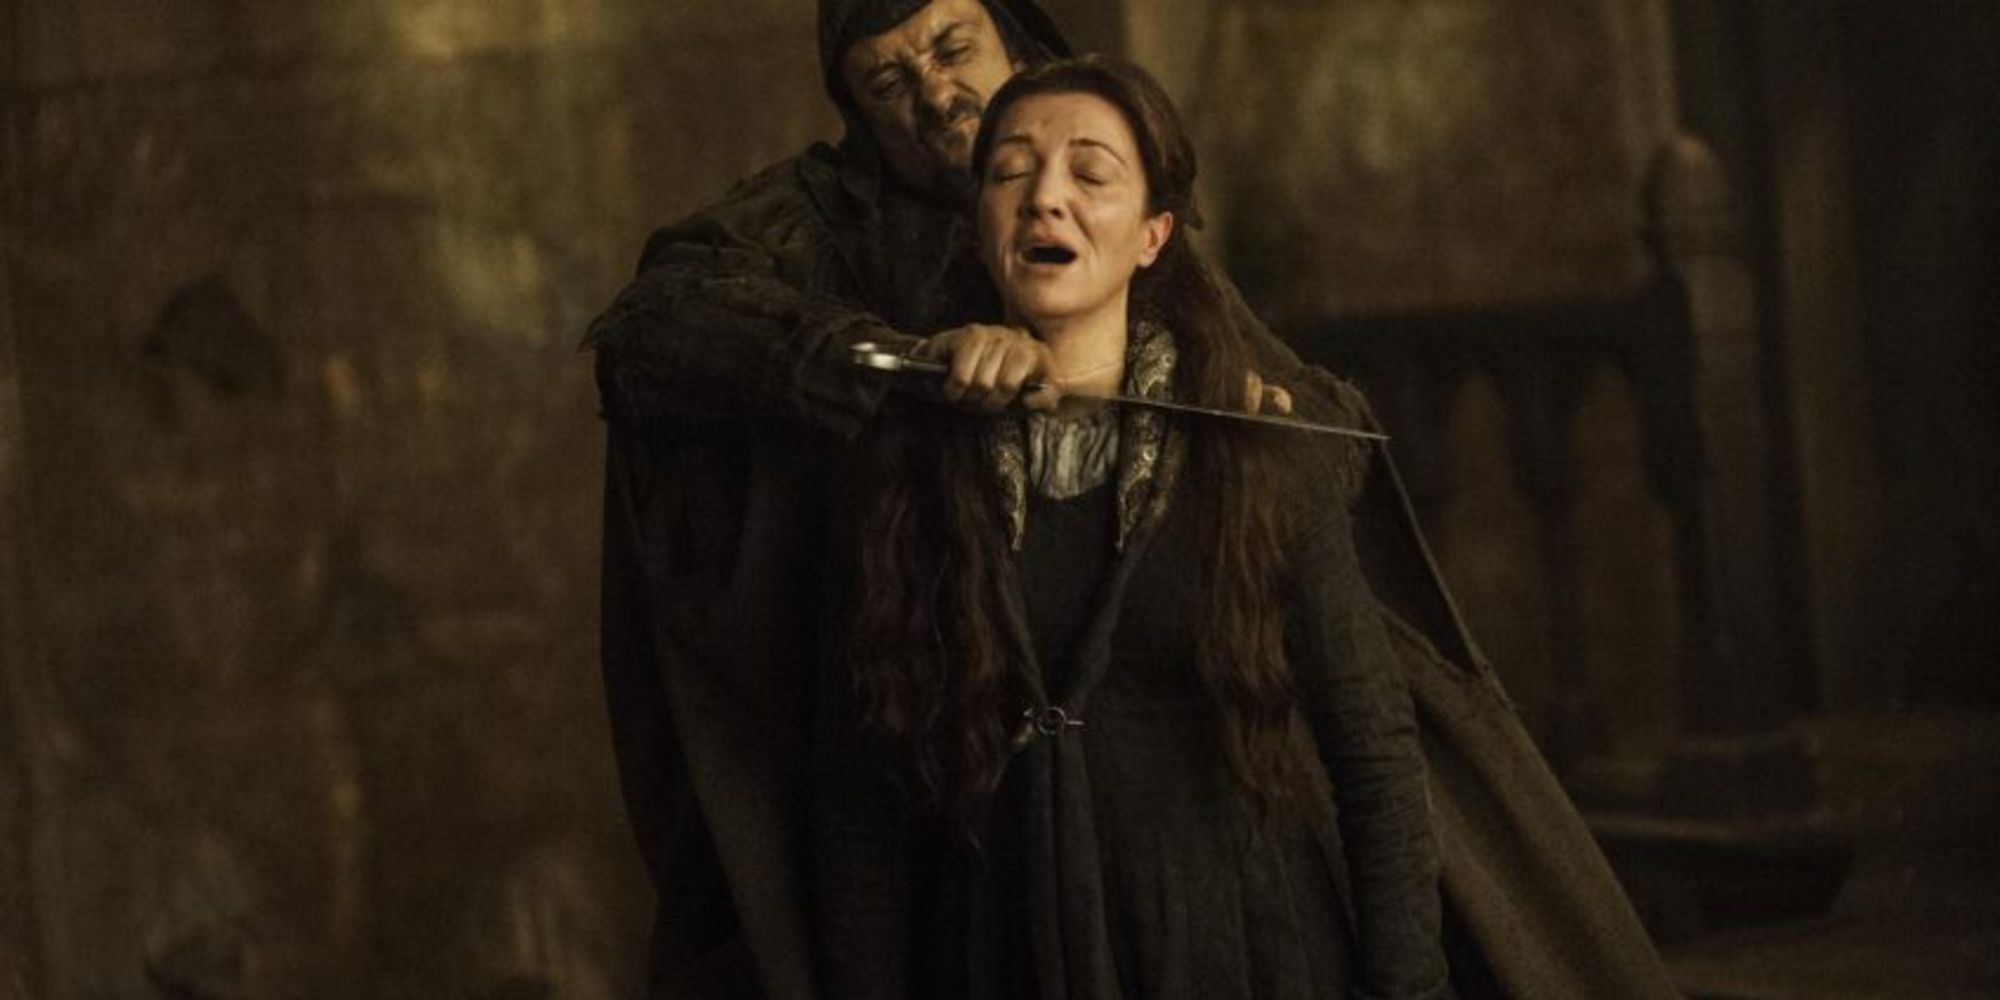 Catelyn's death during the Red Wedding in Game of Thrones